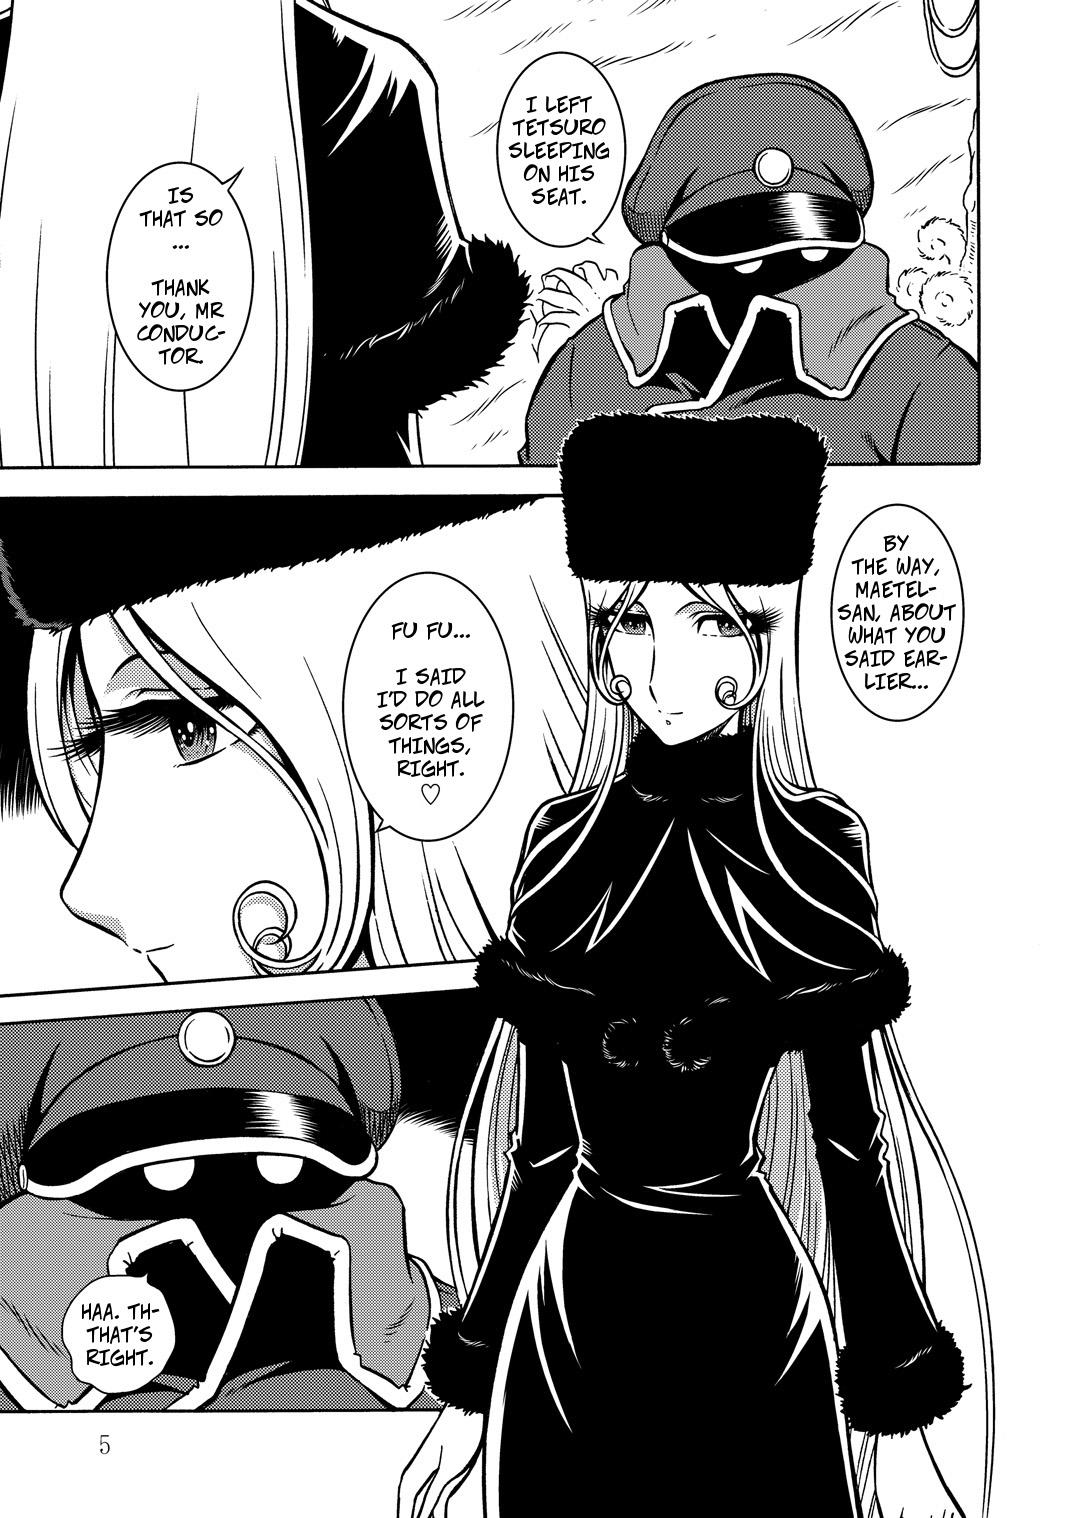 Stepfamily NIGHTHEAD GALAXY EXPRESS 999 2 - Galaxy express 999 Doublepenetration - Page 4